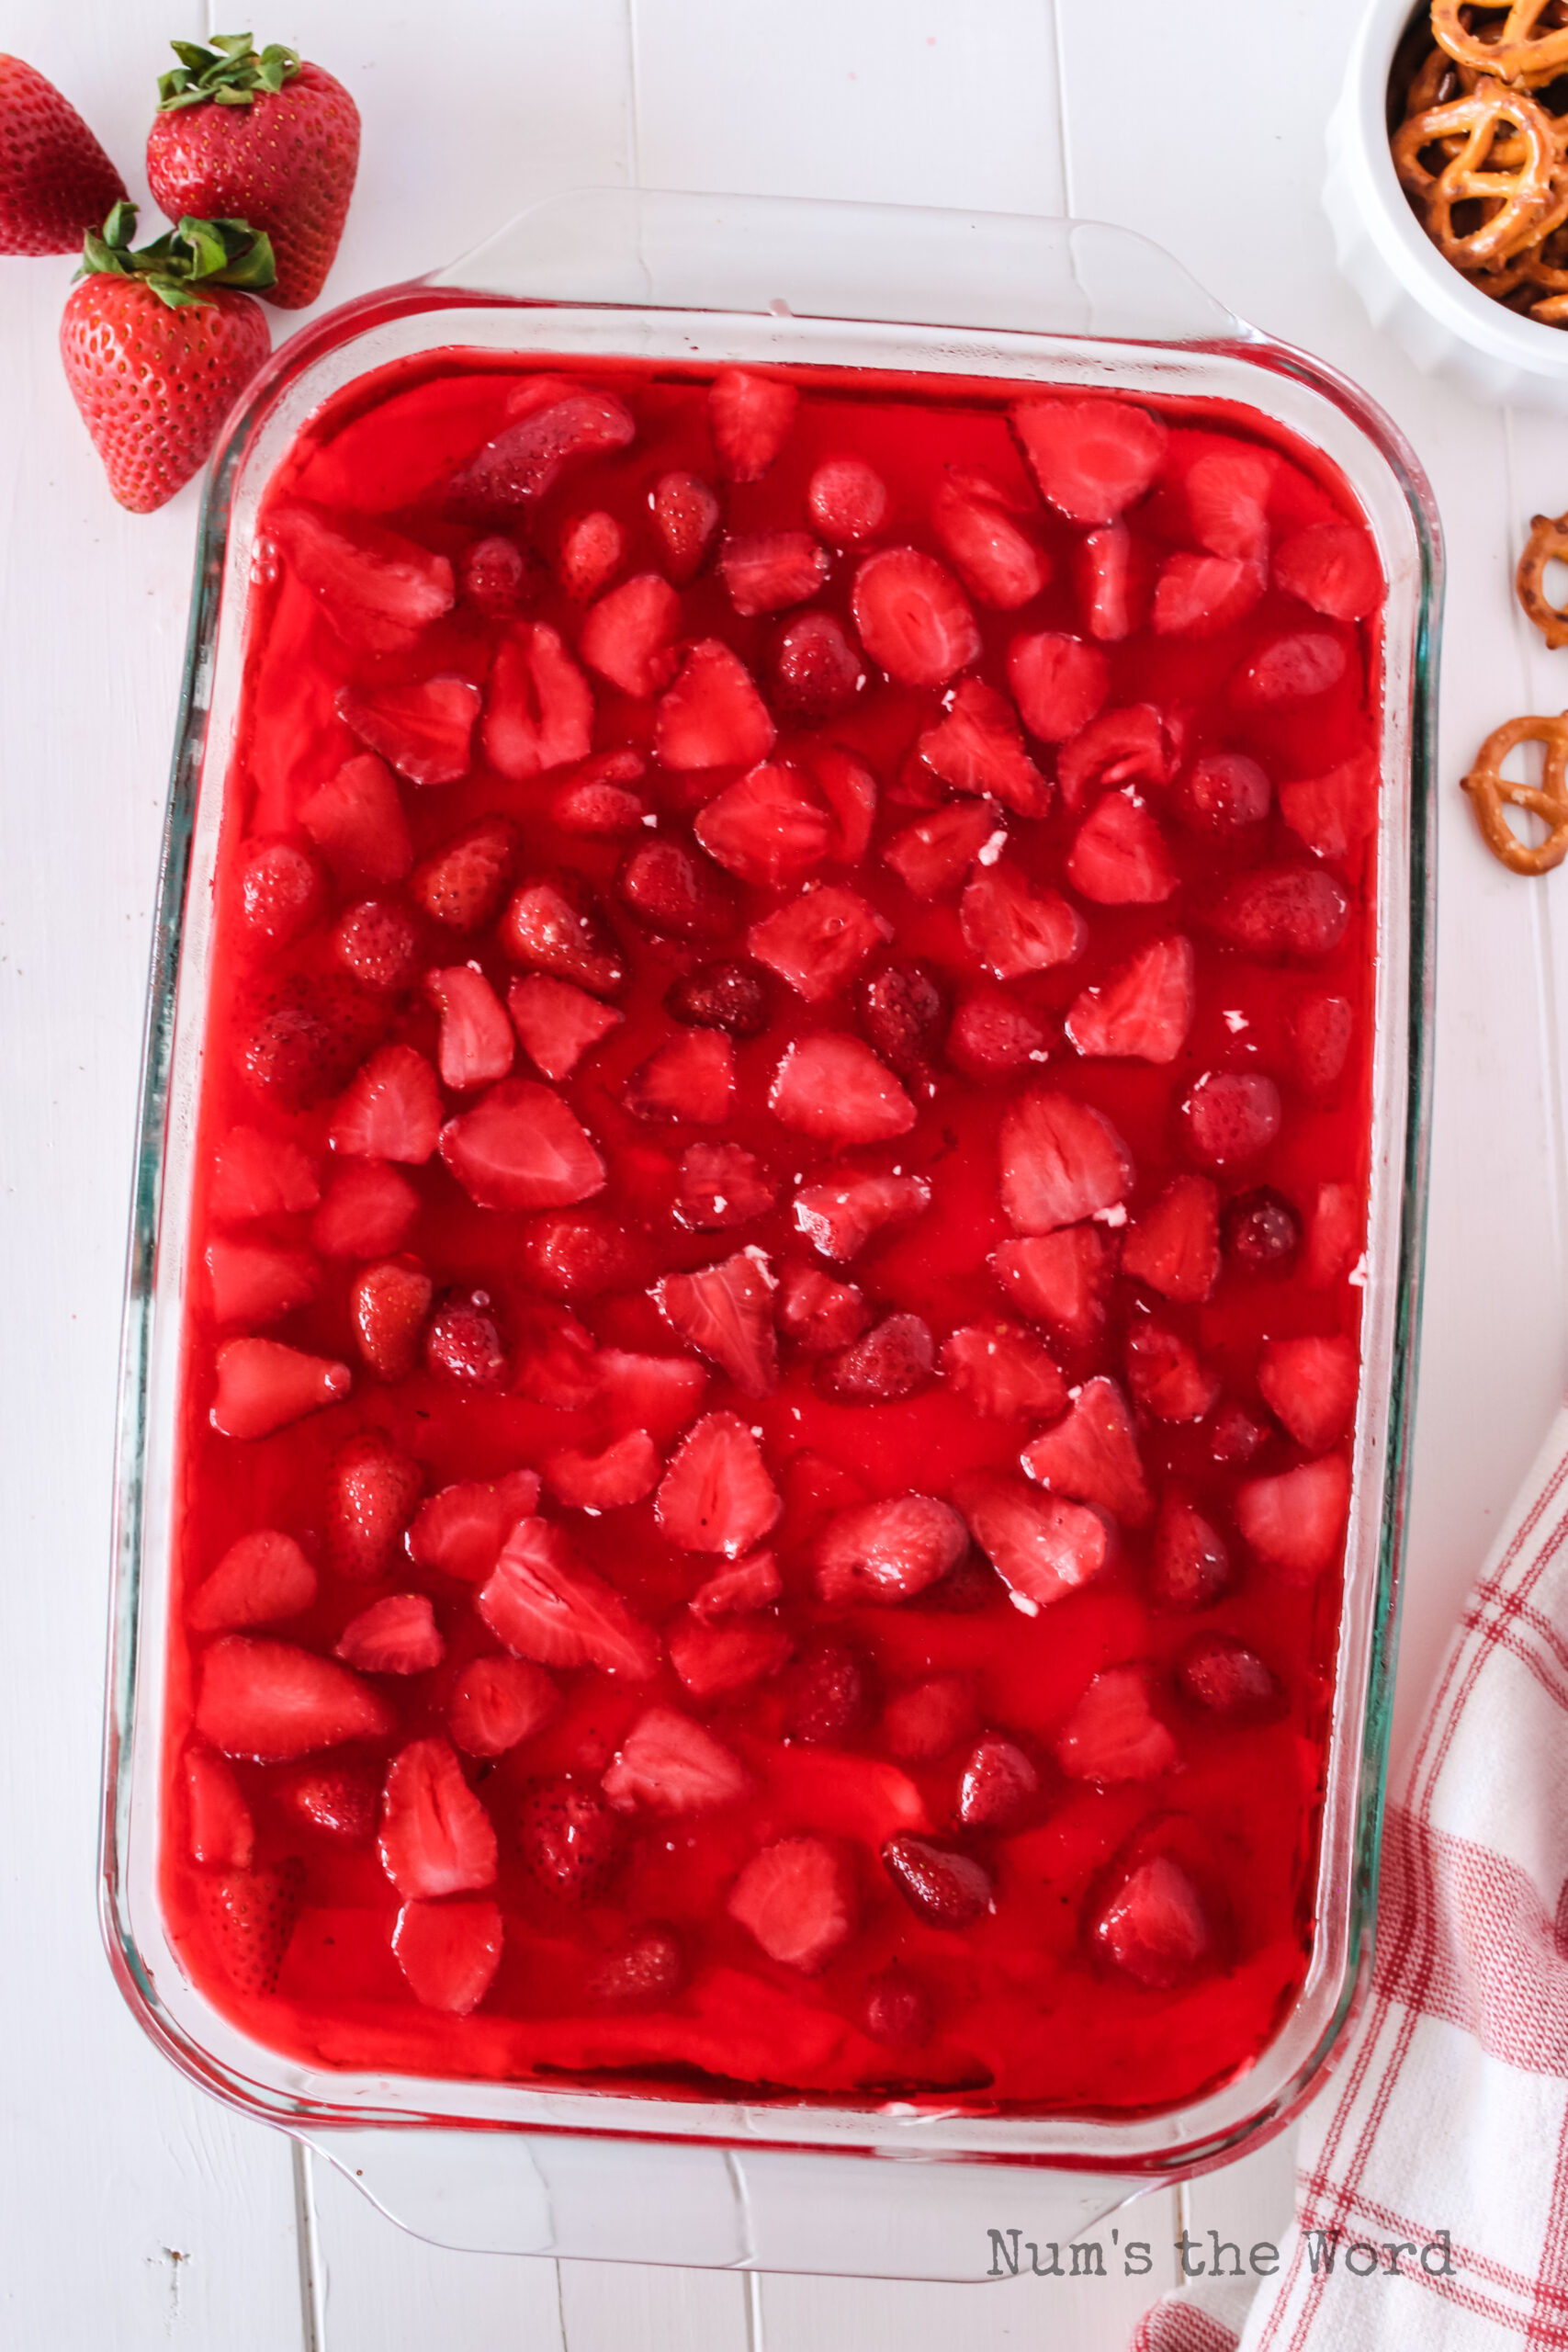 strawberry jello layer on top of the creamy layer.